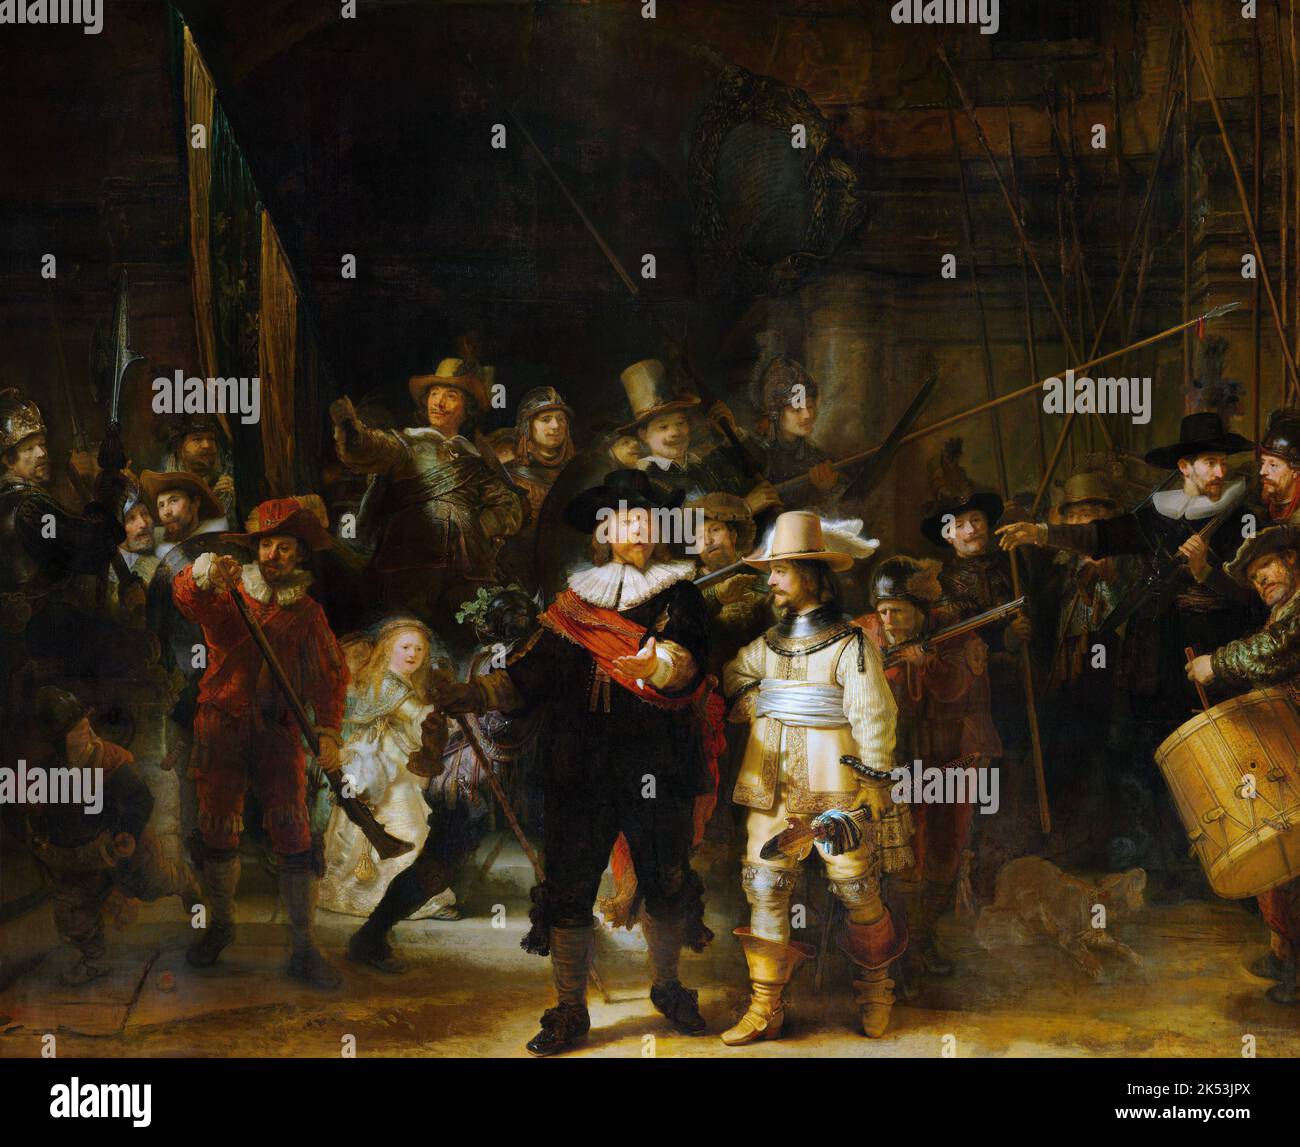 The Night Watch or The Militia Company of Captain Frans Banning Cocq, 1642. Painting by Rembrandt Stock Photo